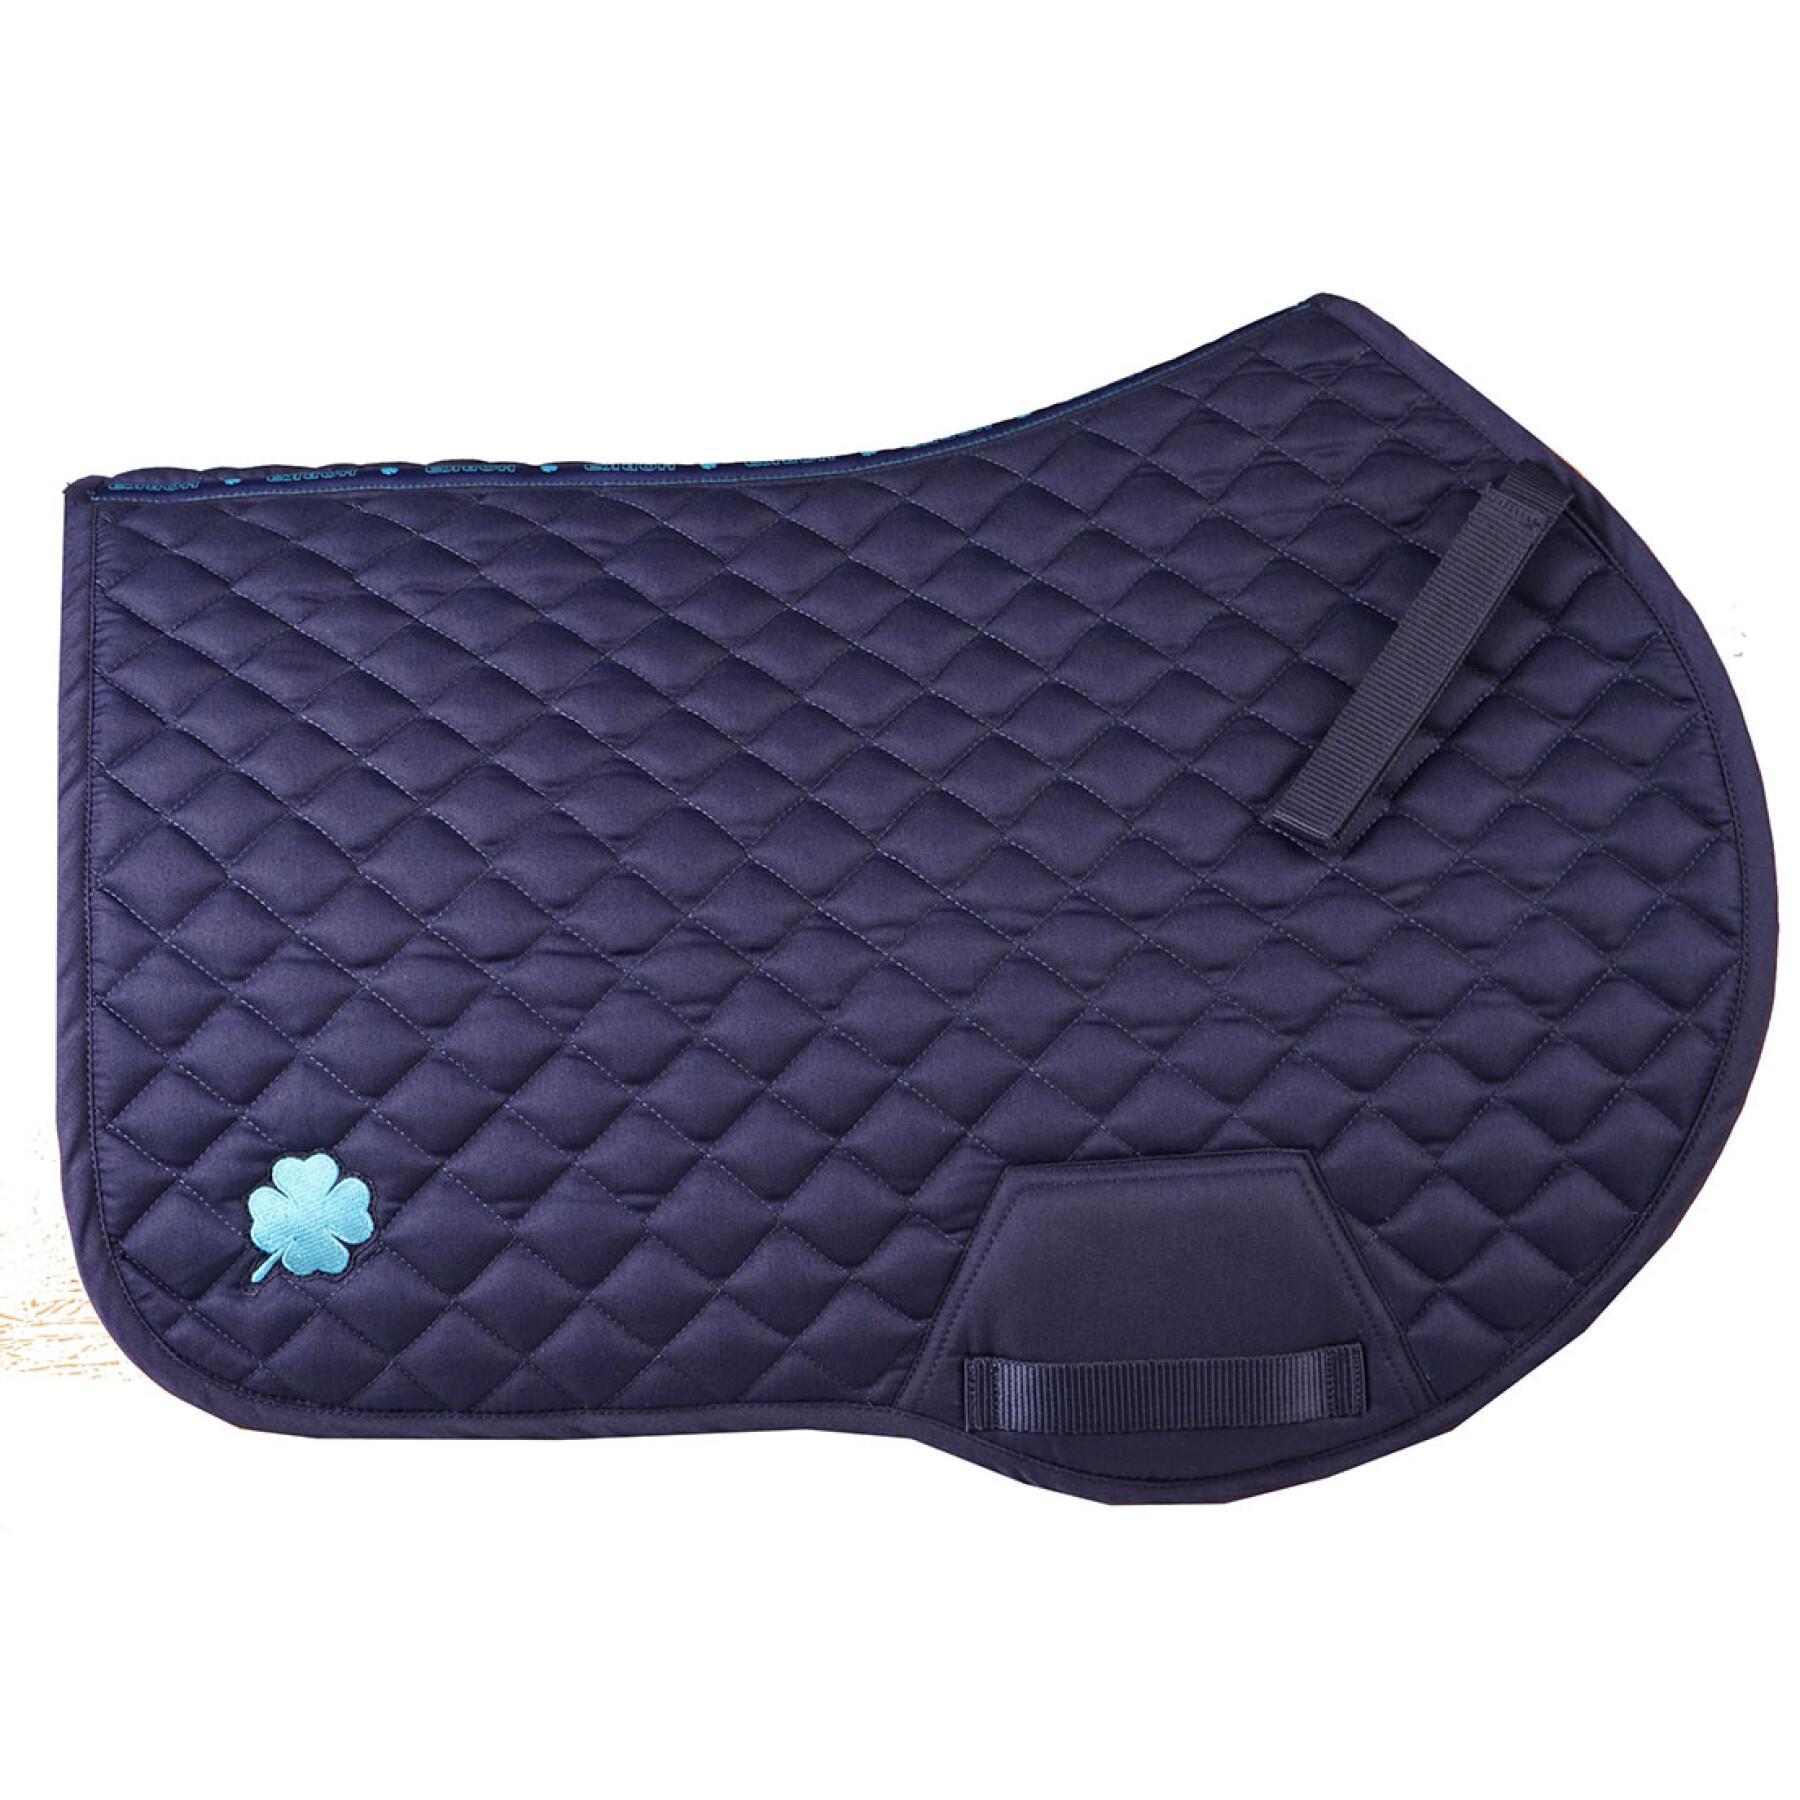 Saddle pad for horses Horka Cc By Jordy